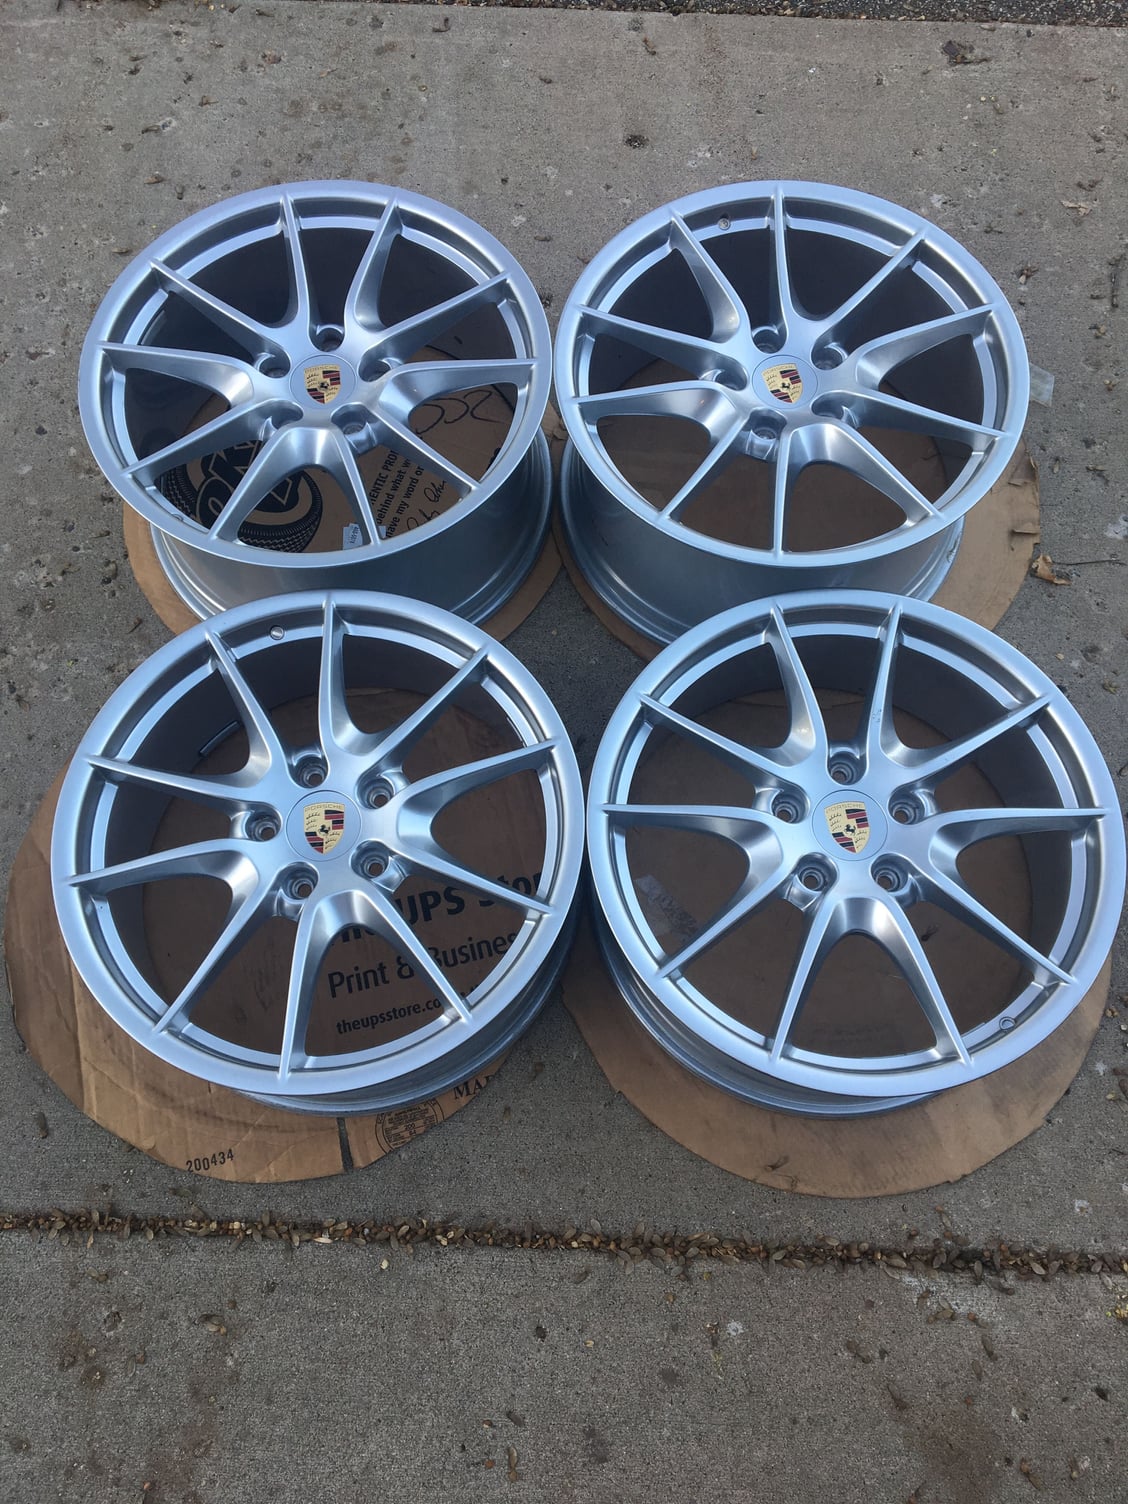 Wheels and Tires/Axles - 20" OEM Porsche Cayman/Boxster Carrera S III Wheels - 981 987 986 718 - Used - 1996 to 2018 Porsche Boxster - 2005 to 2018 Porsche Cayman - Minneapolis, MN 55447, United States